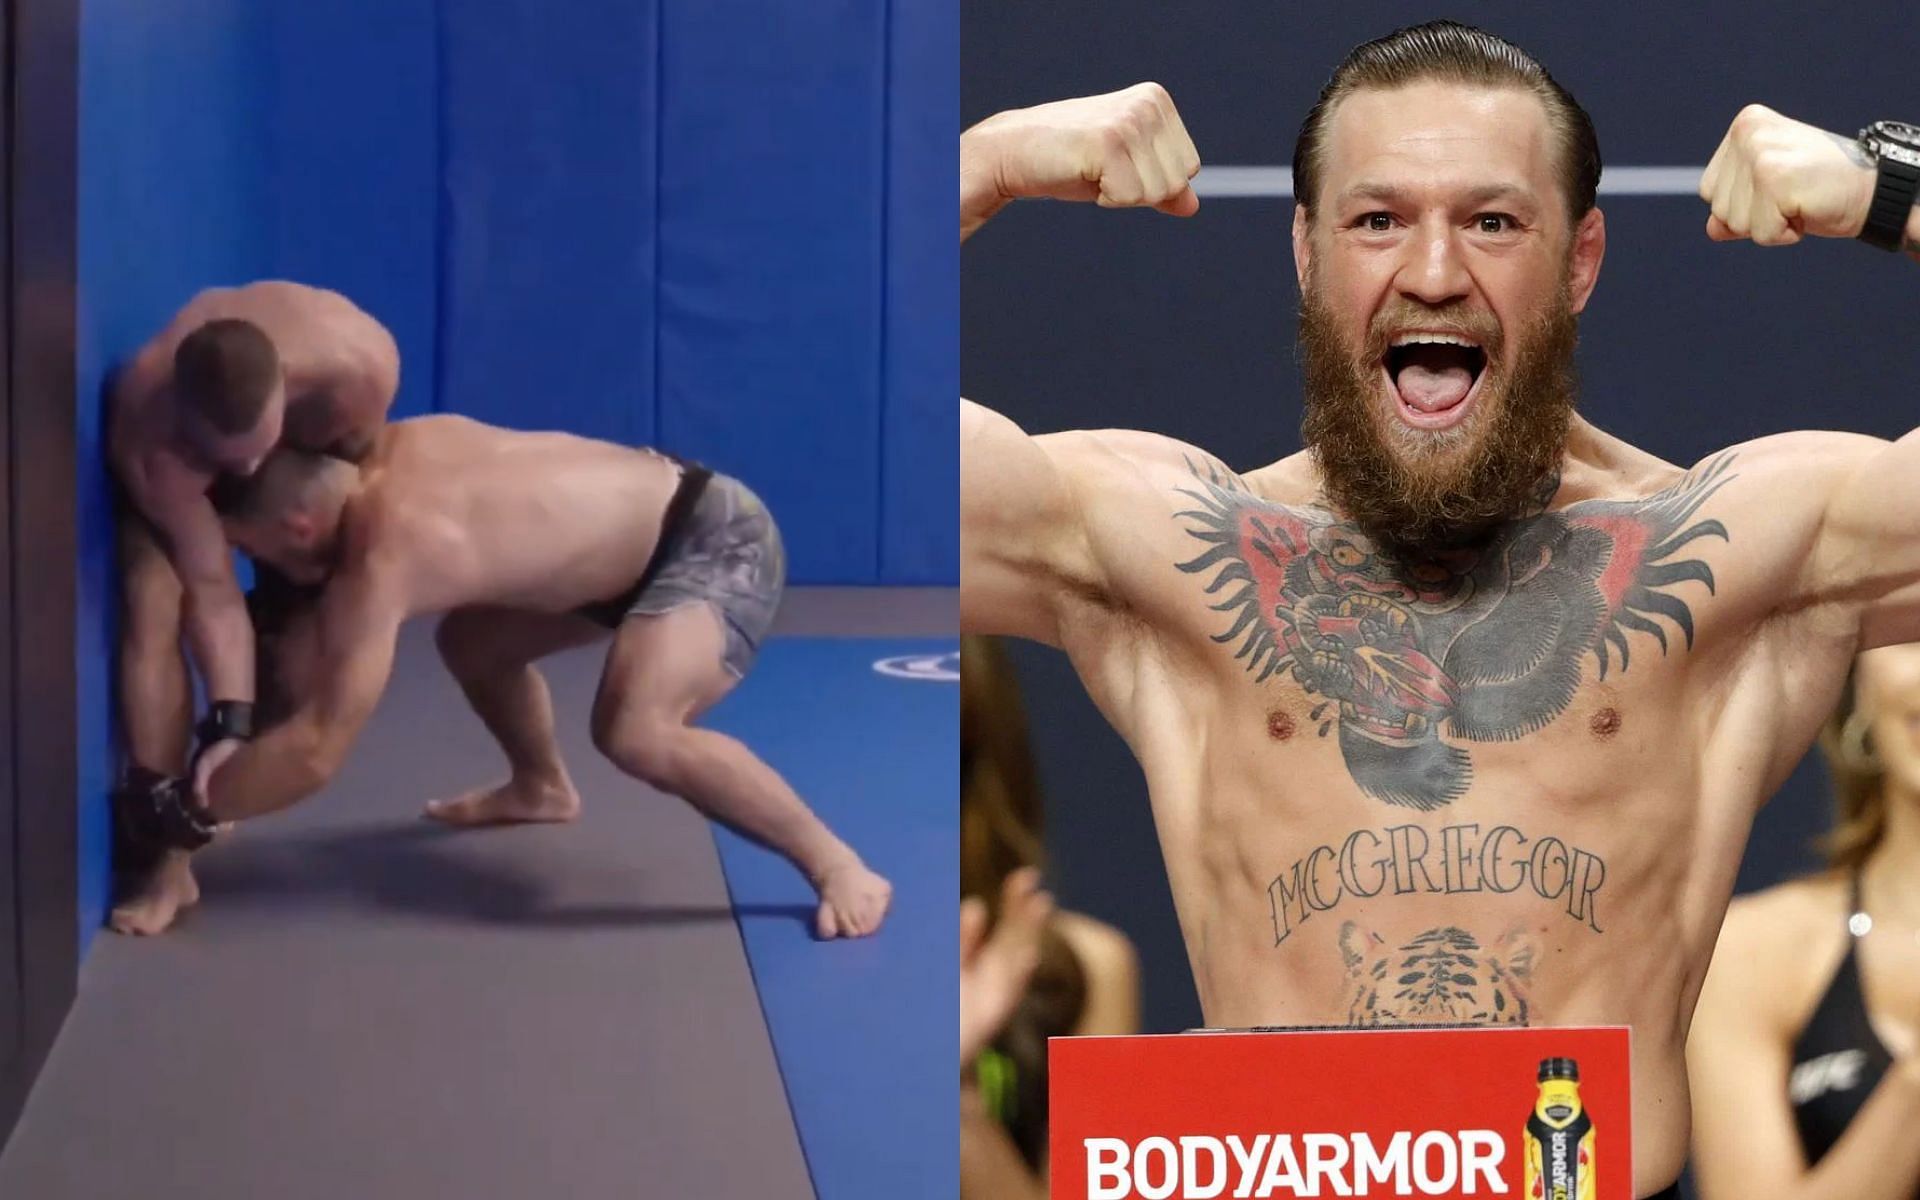 Recent footage of Conor McGregor grappling (left)[Image courtesy: @thenotoriousmma on Instagram] and Conor McGregor (right)